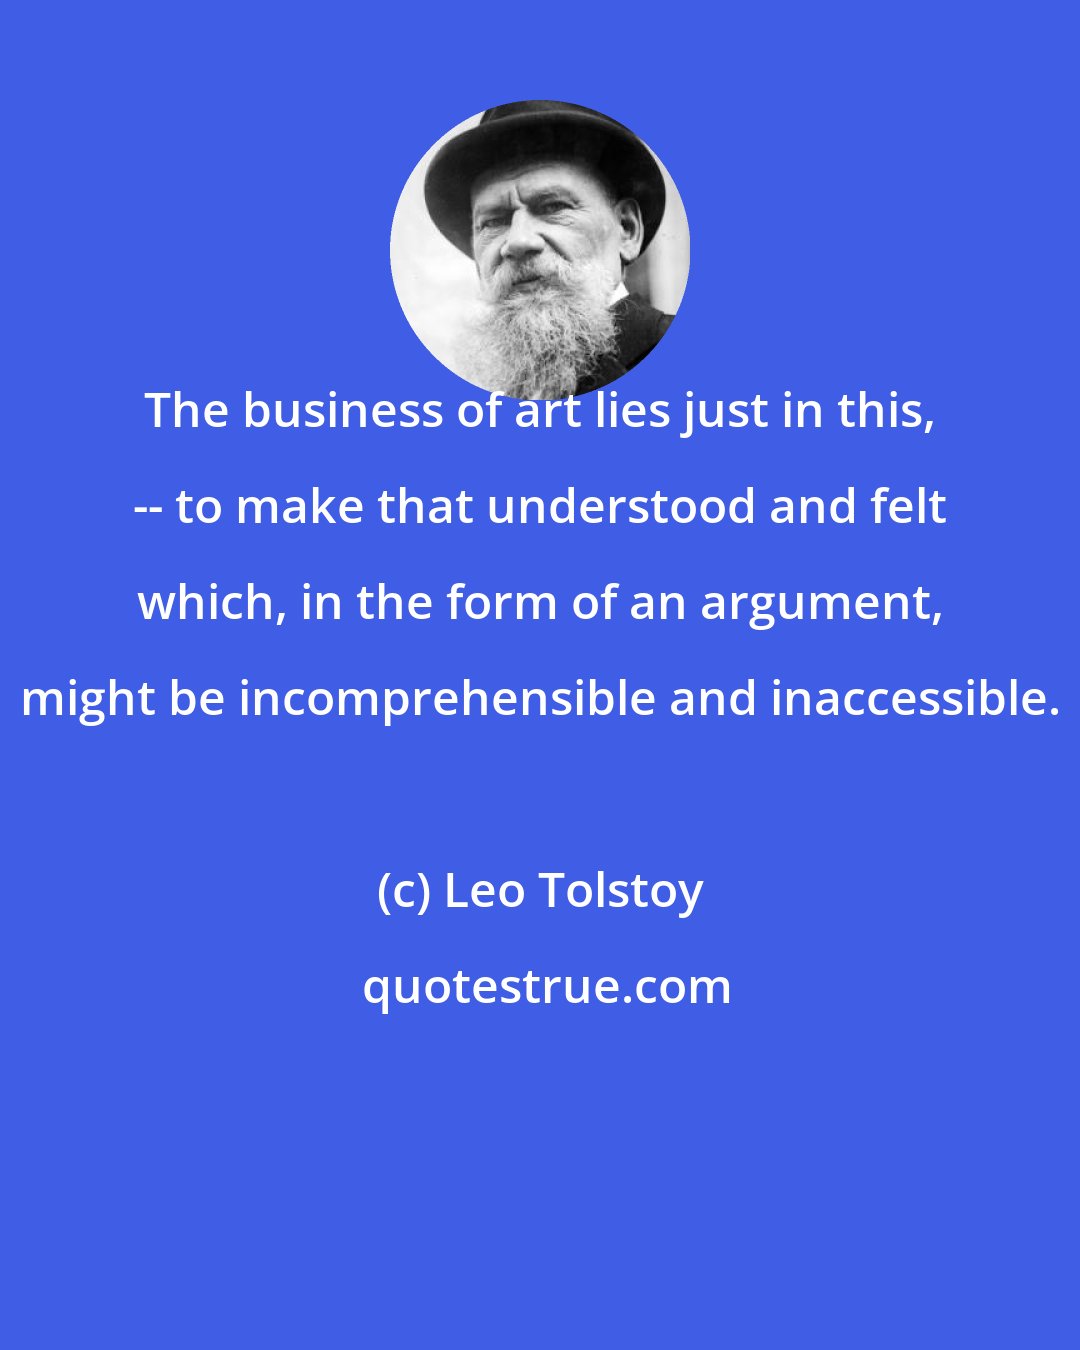 Leo Tolstoy: The business of art lies just in this, -- to make that understood and felt which, in the form of an argument, might be incomprehensible and inaccessible.